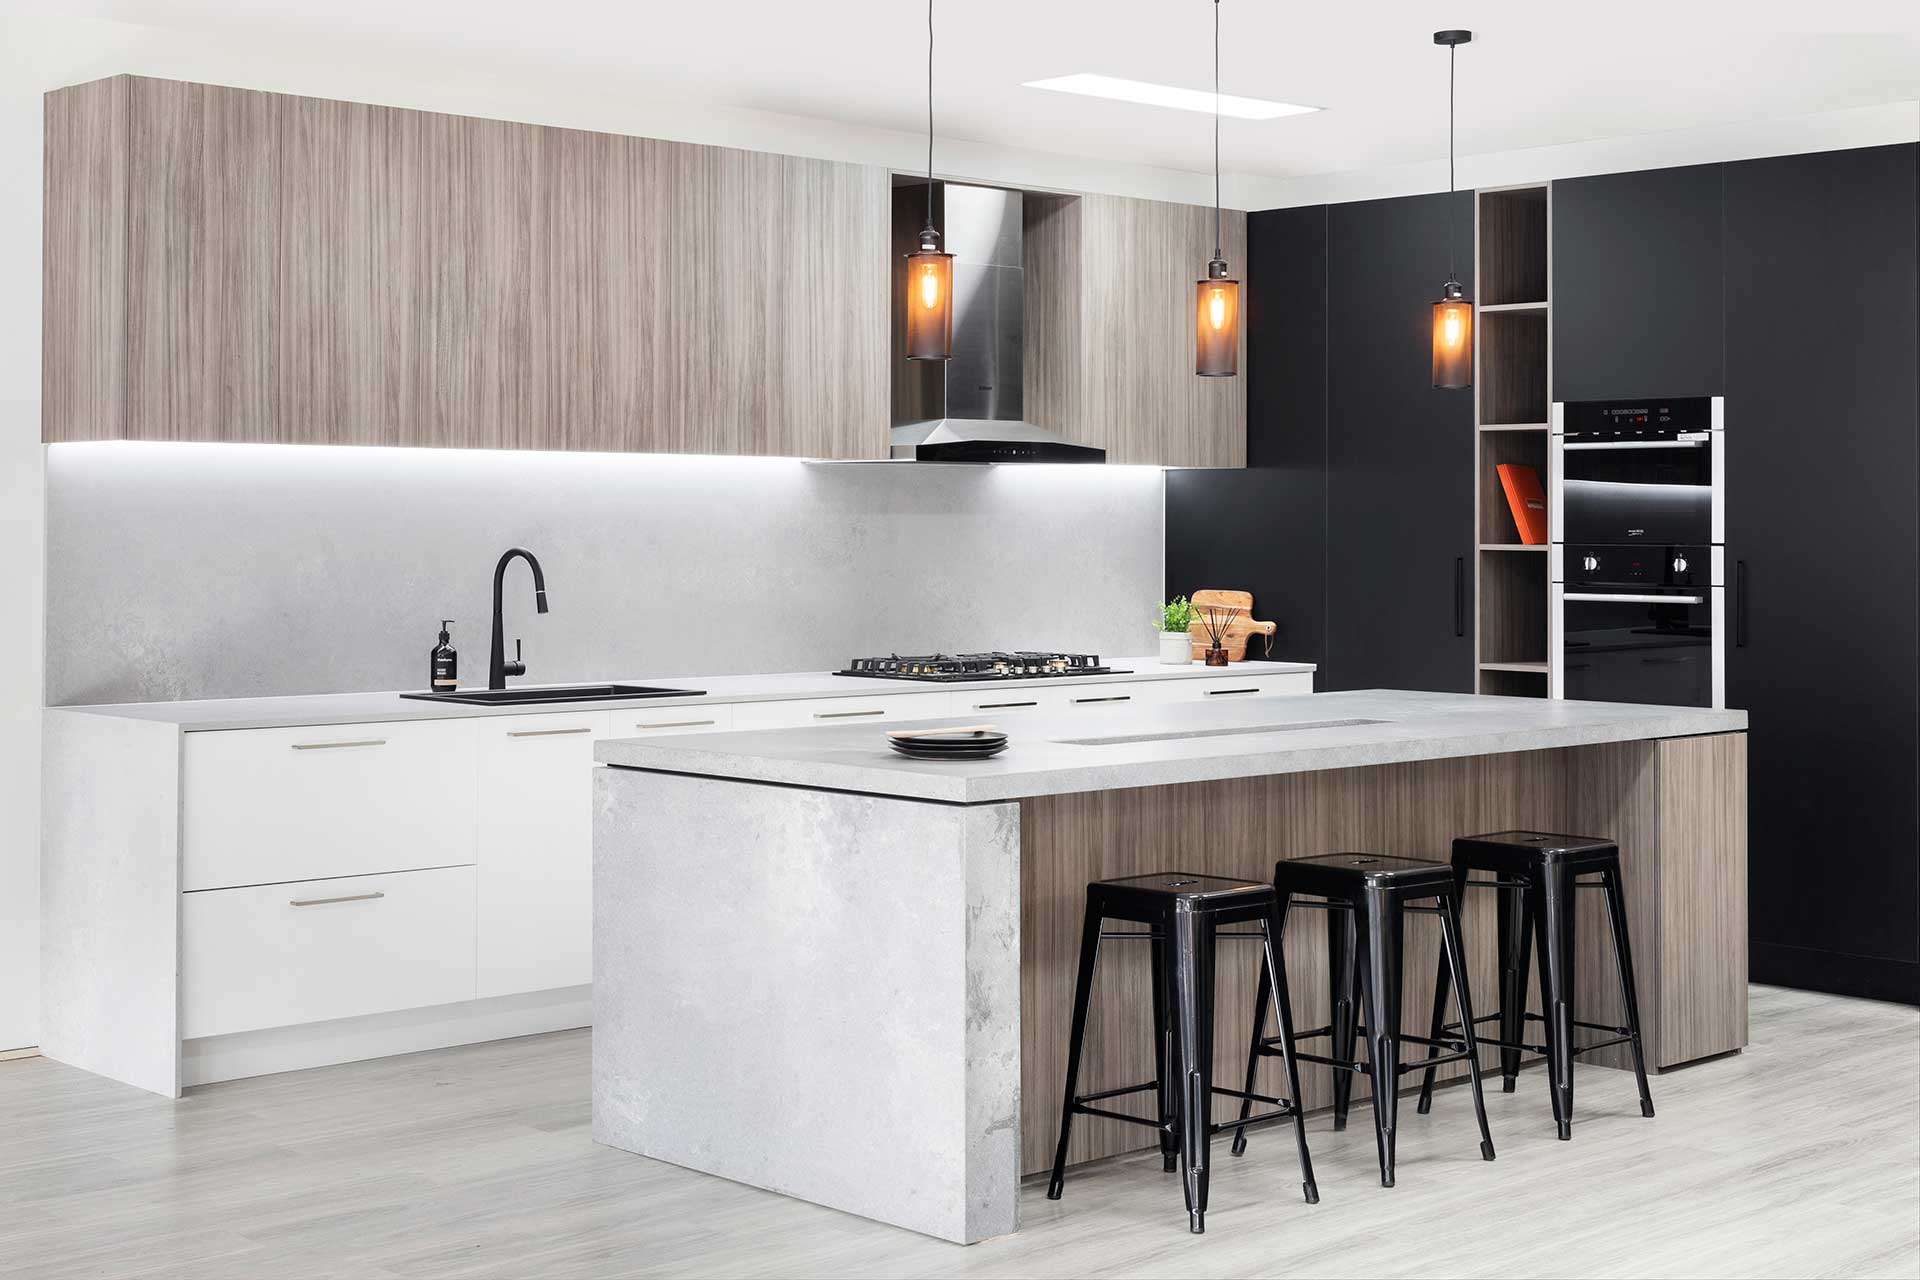 Transform Your Space With Contemporary Kitchen Design - Kind Kitchens